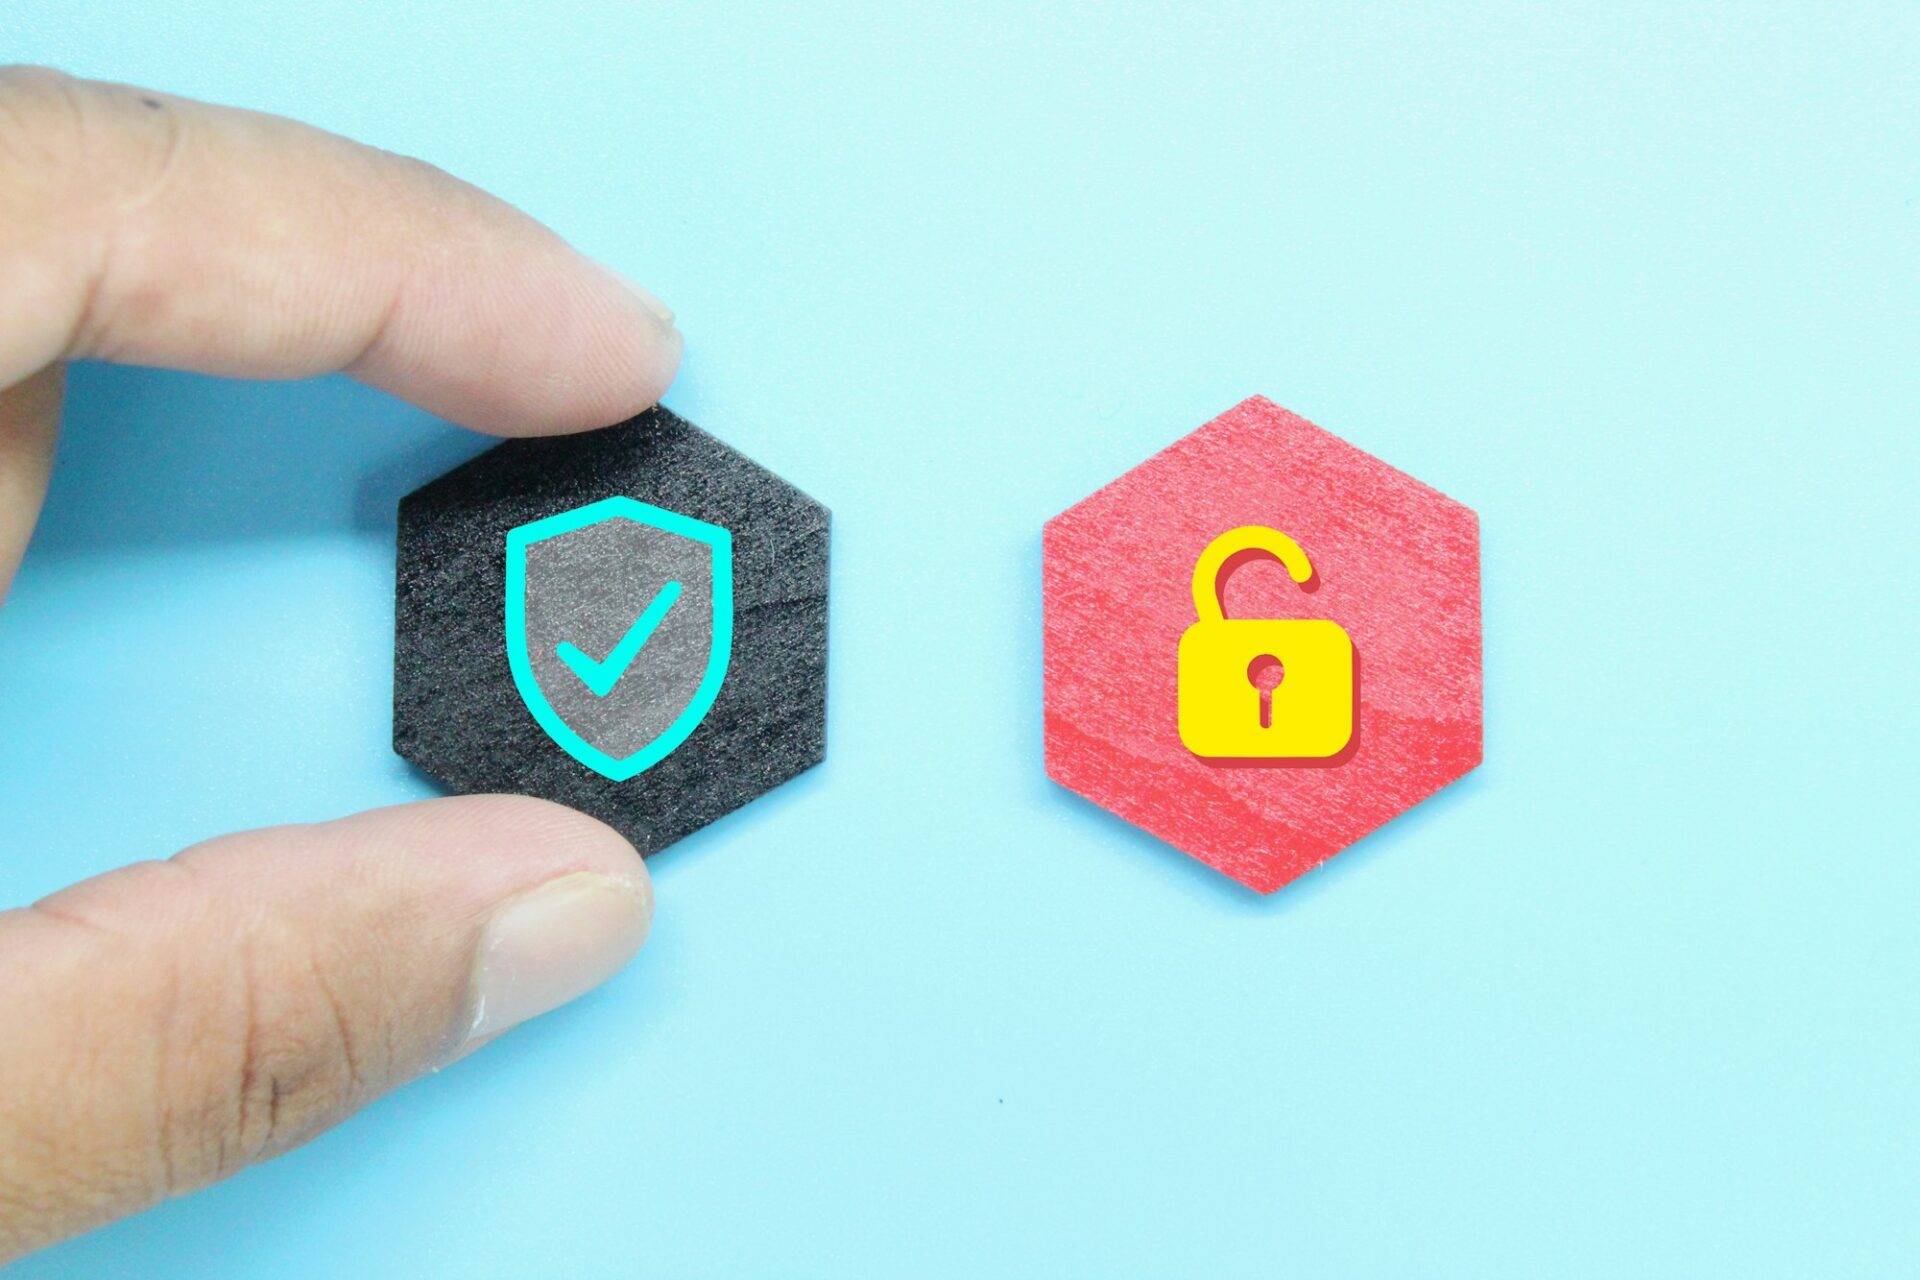 hexagon with security and Unsecure icons.